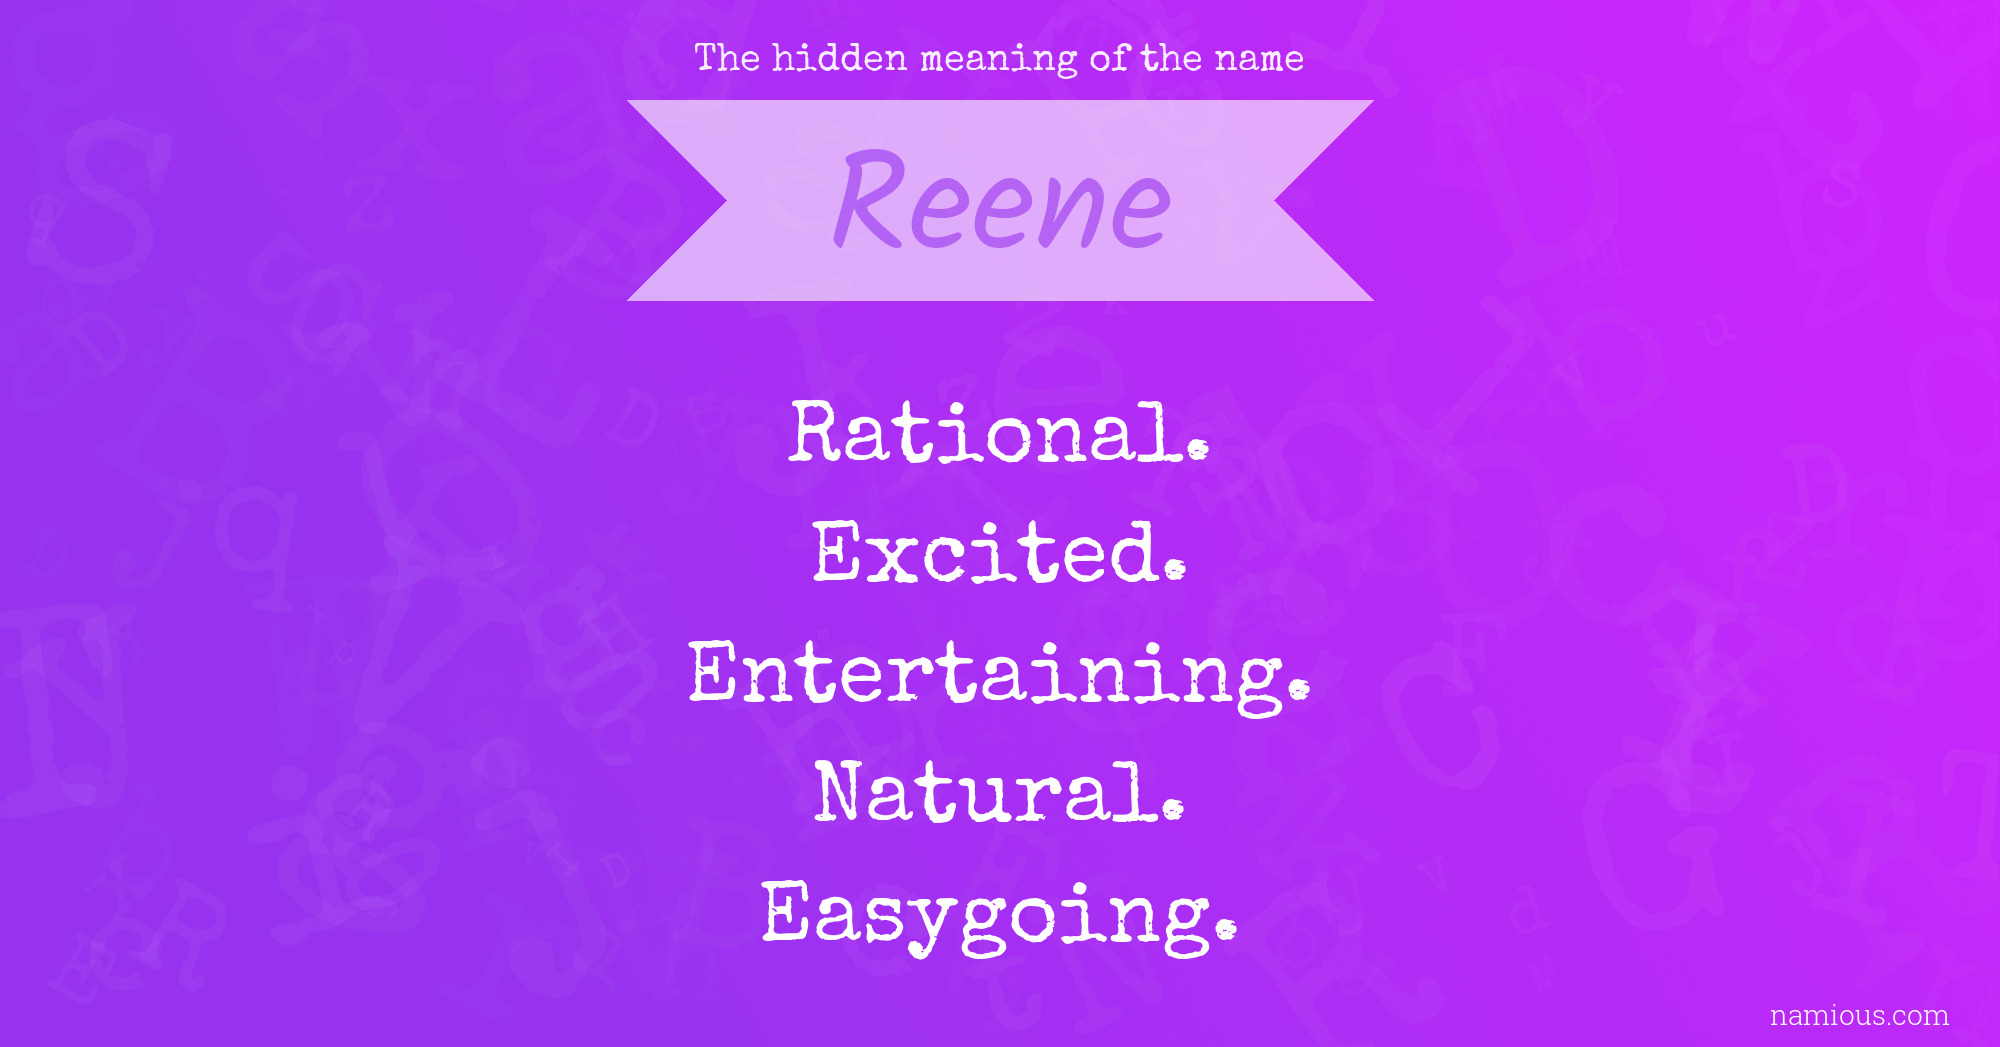 The hidden meaning of the name Reene